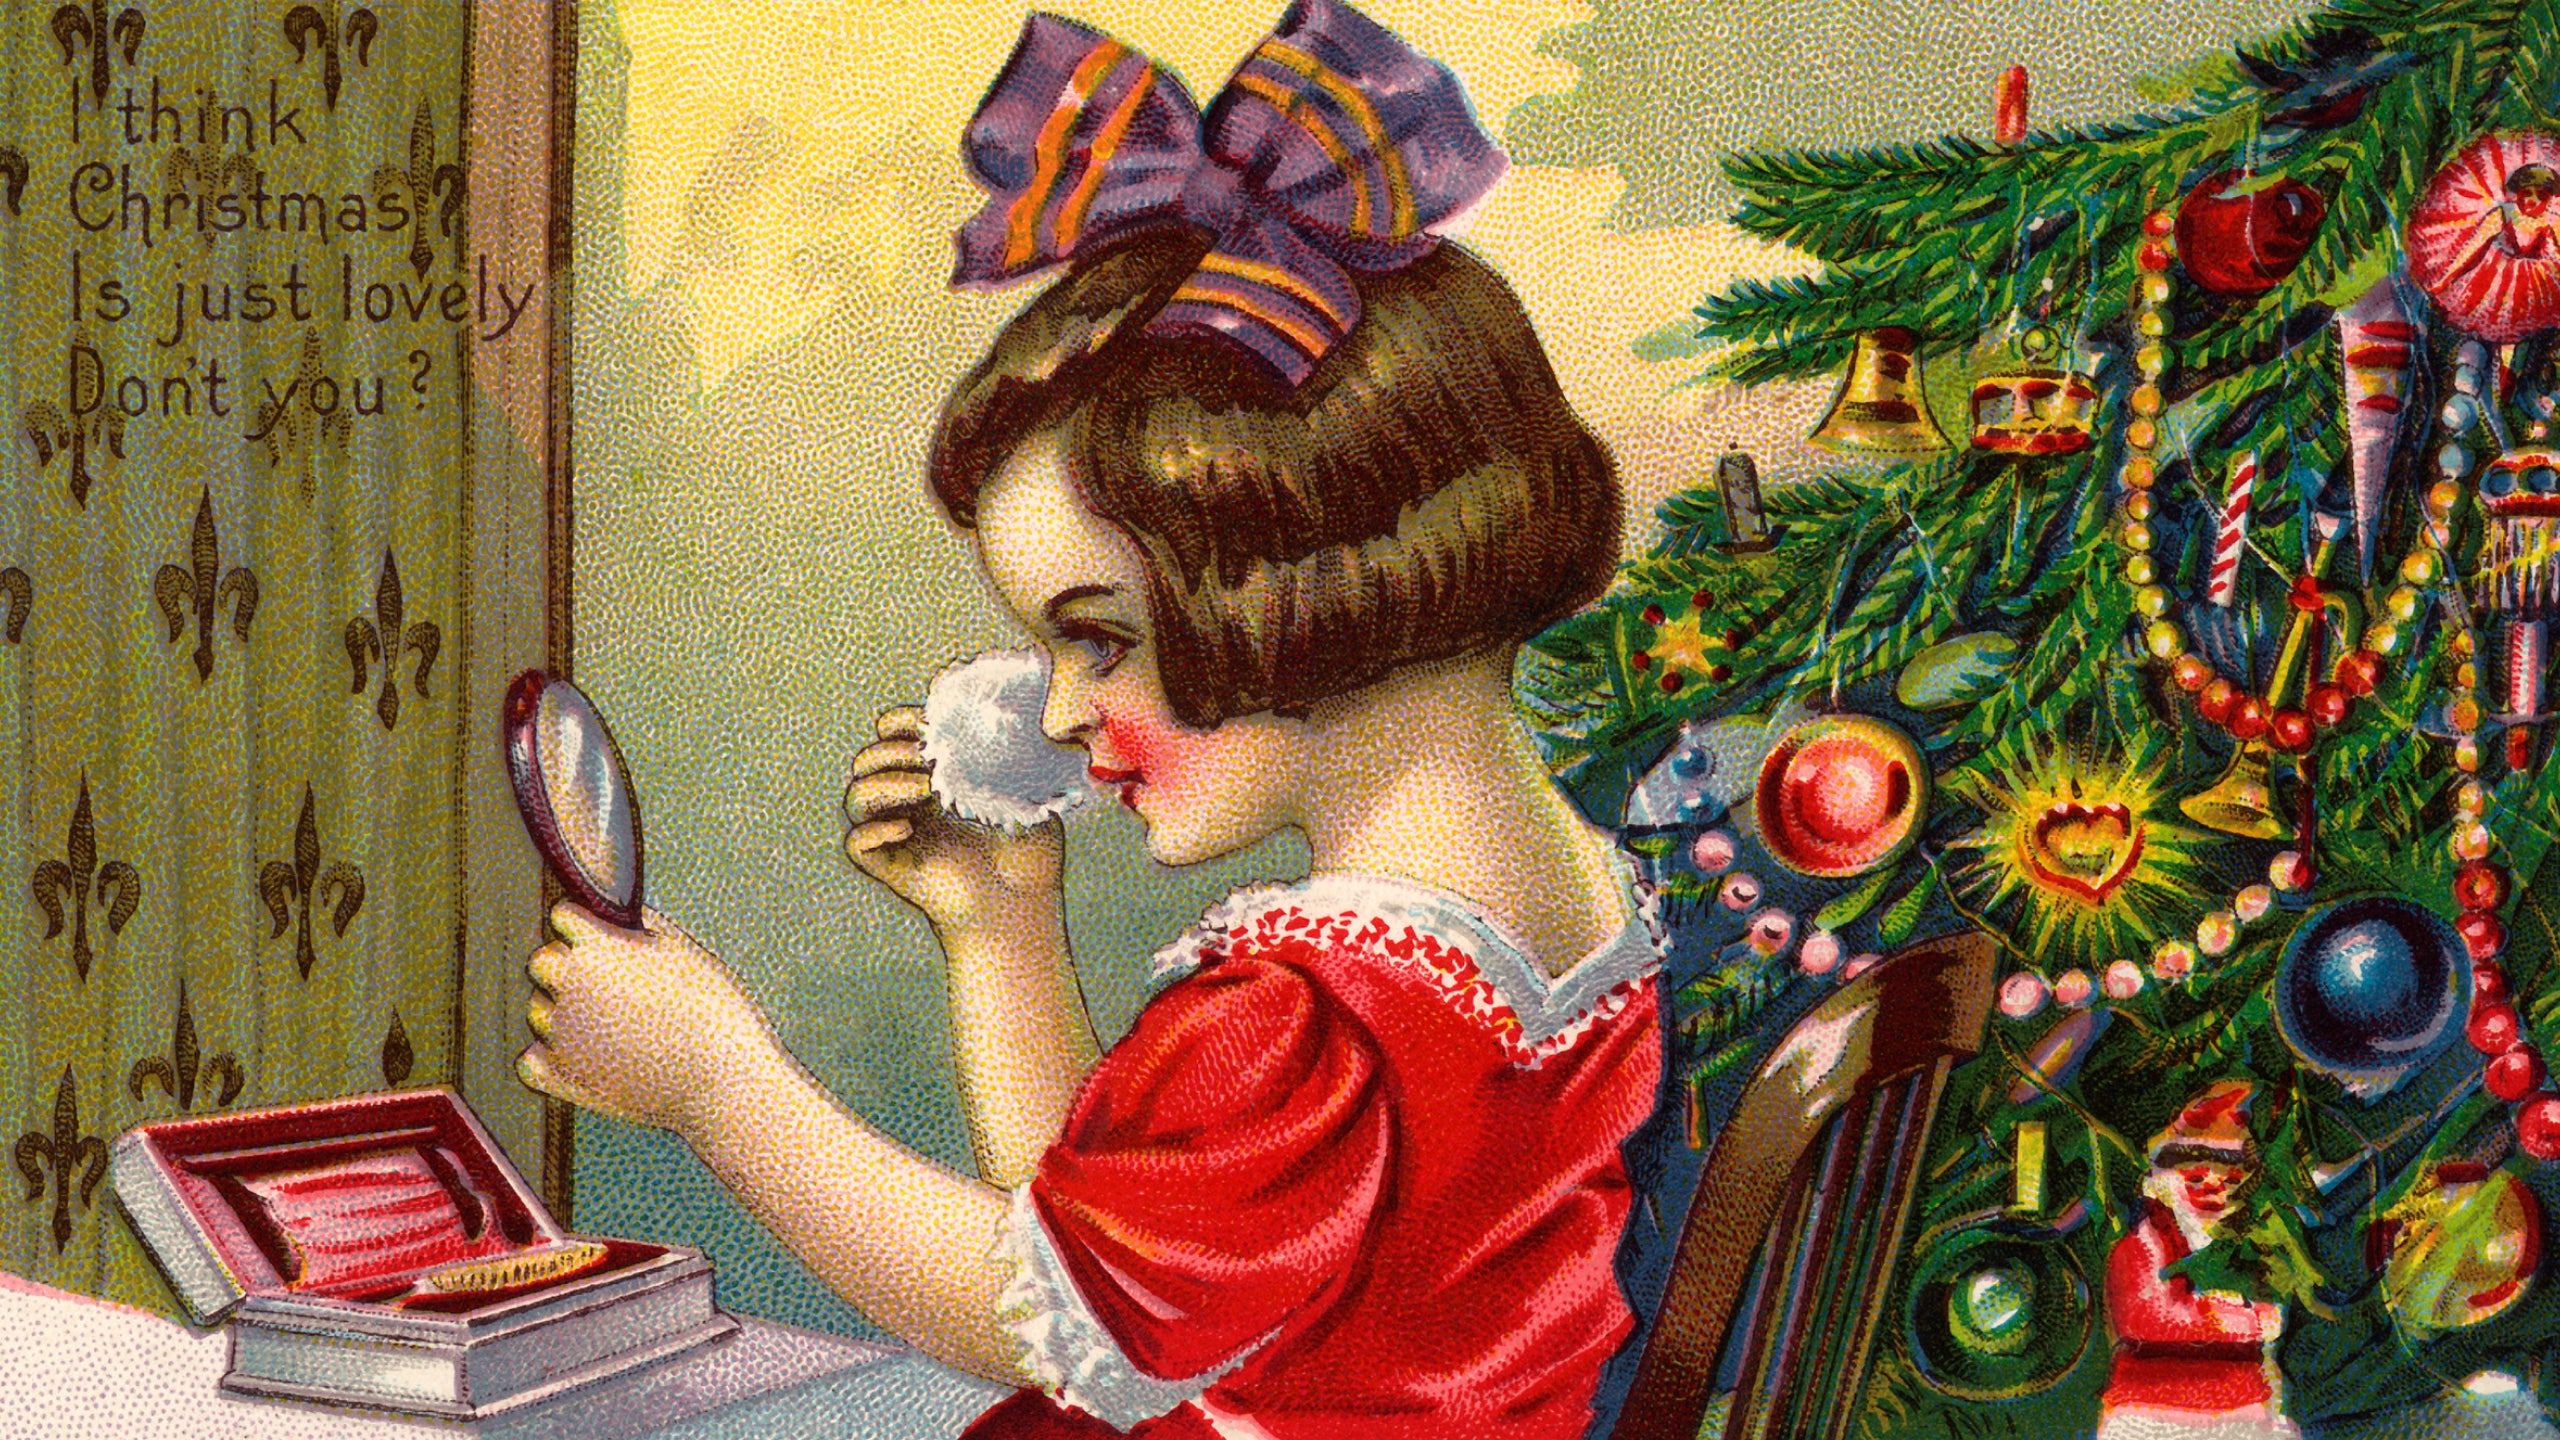 11 of the Weirdest Christmas Traditions We Should Absolutely Bring Back